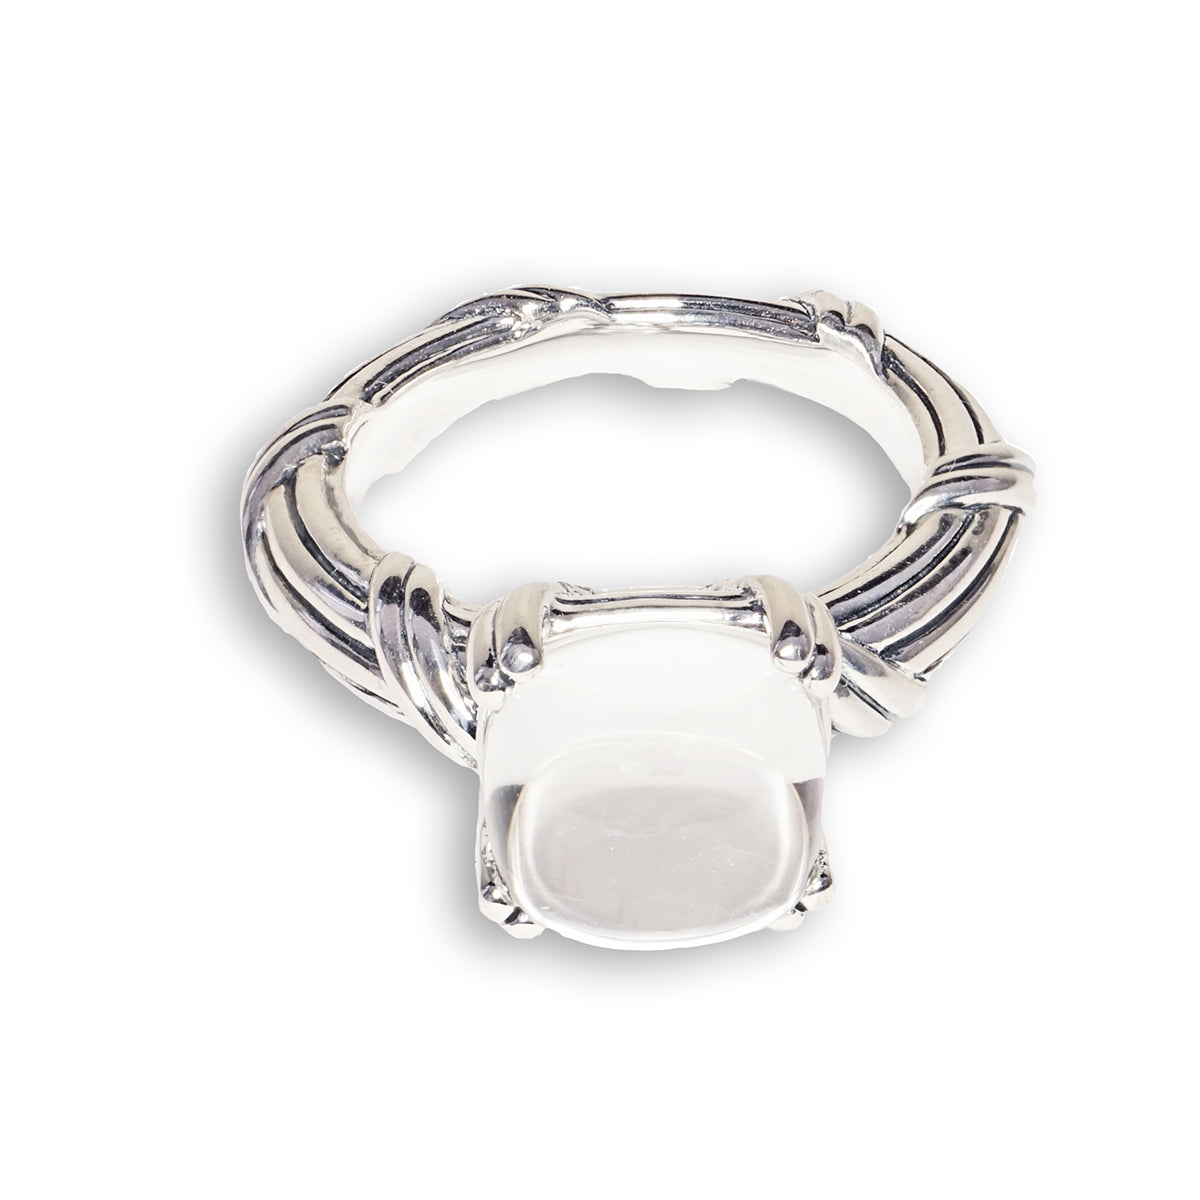 Fantasies White Topaz Cabochon Ring in sterling silver 10mm